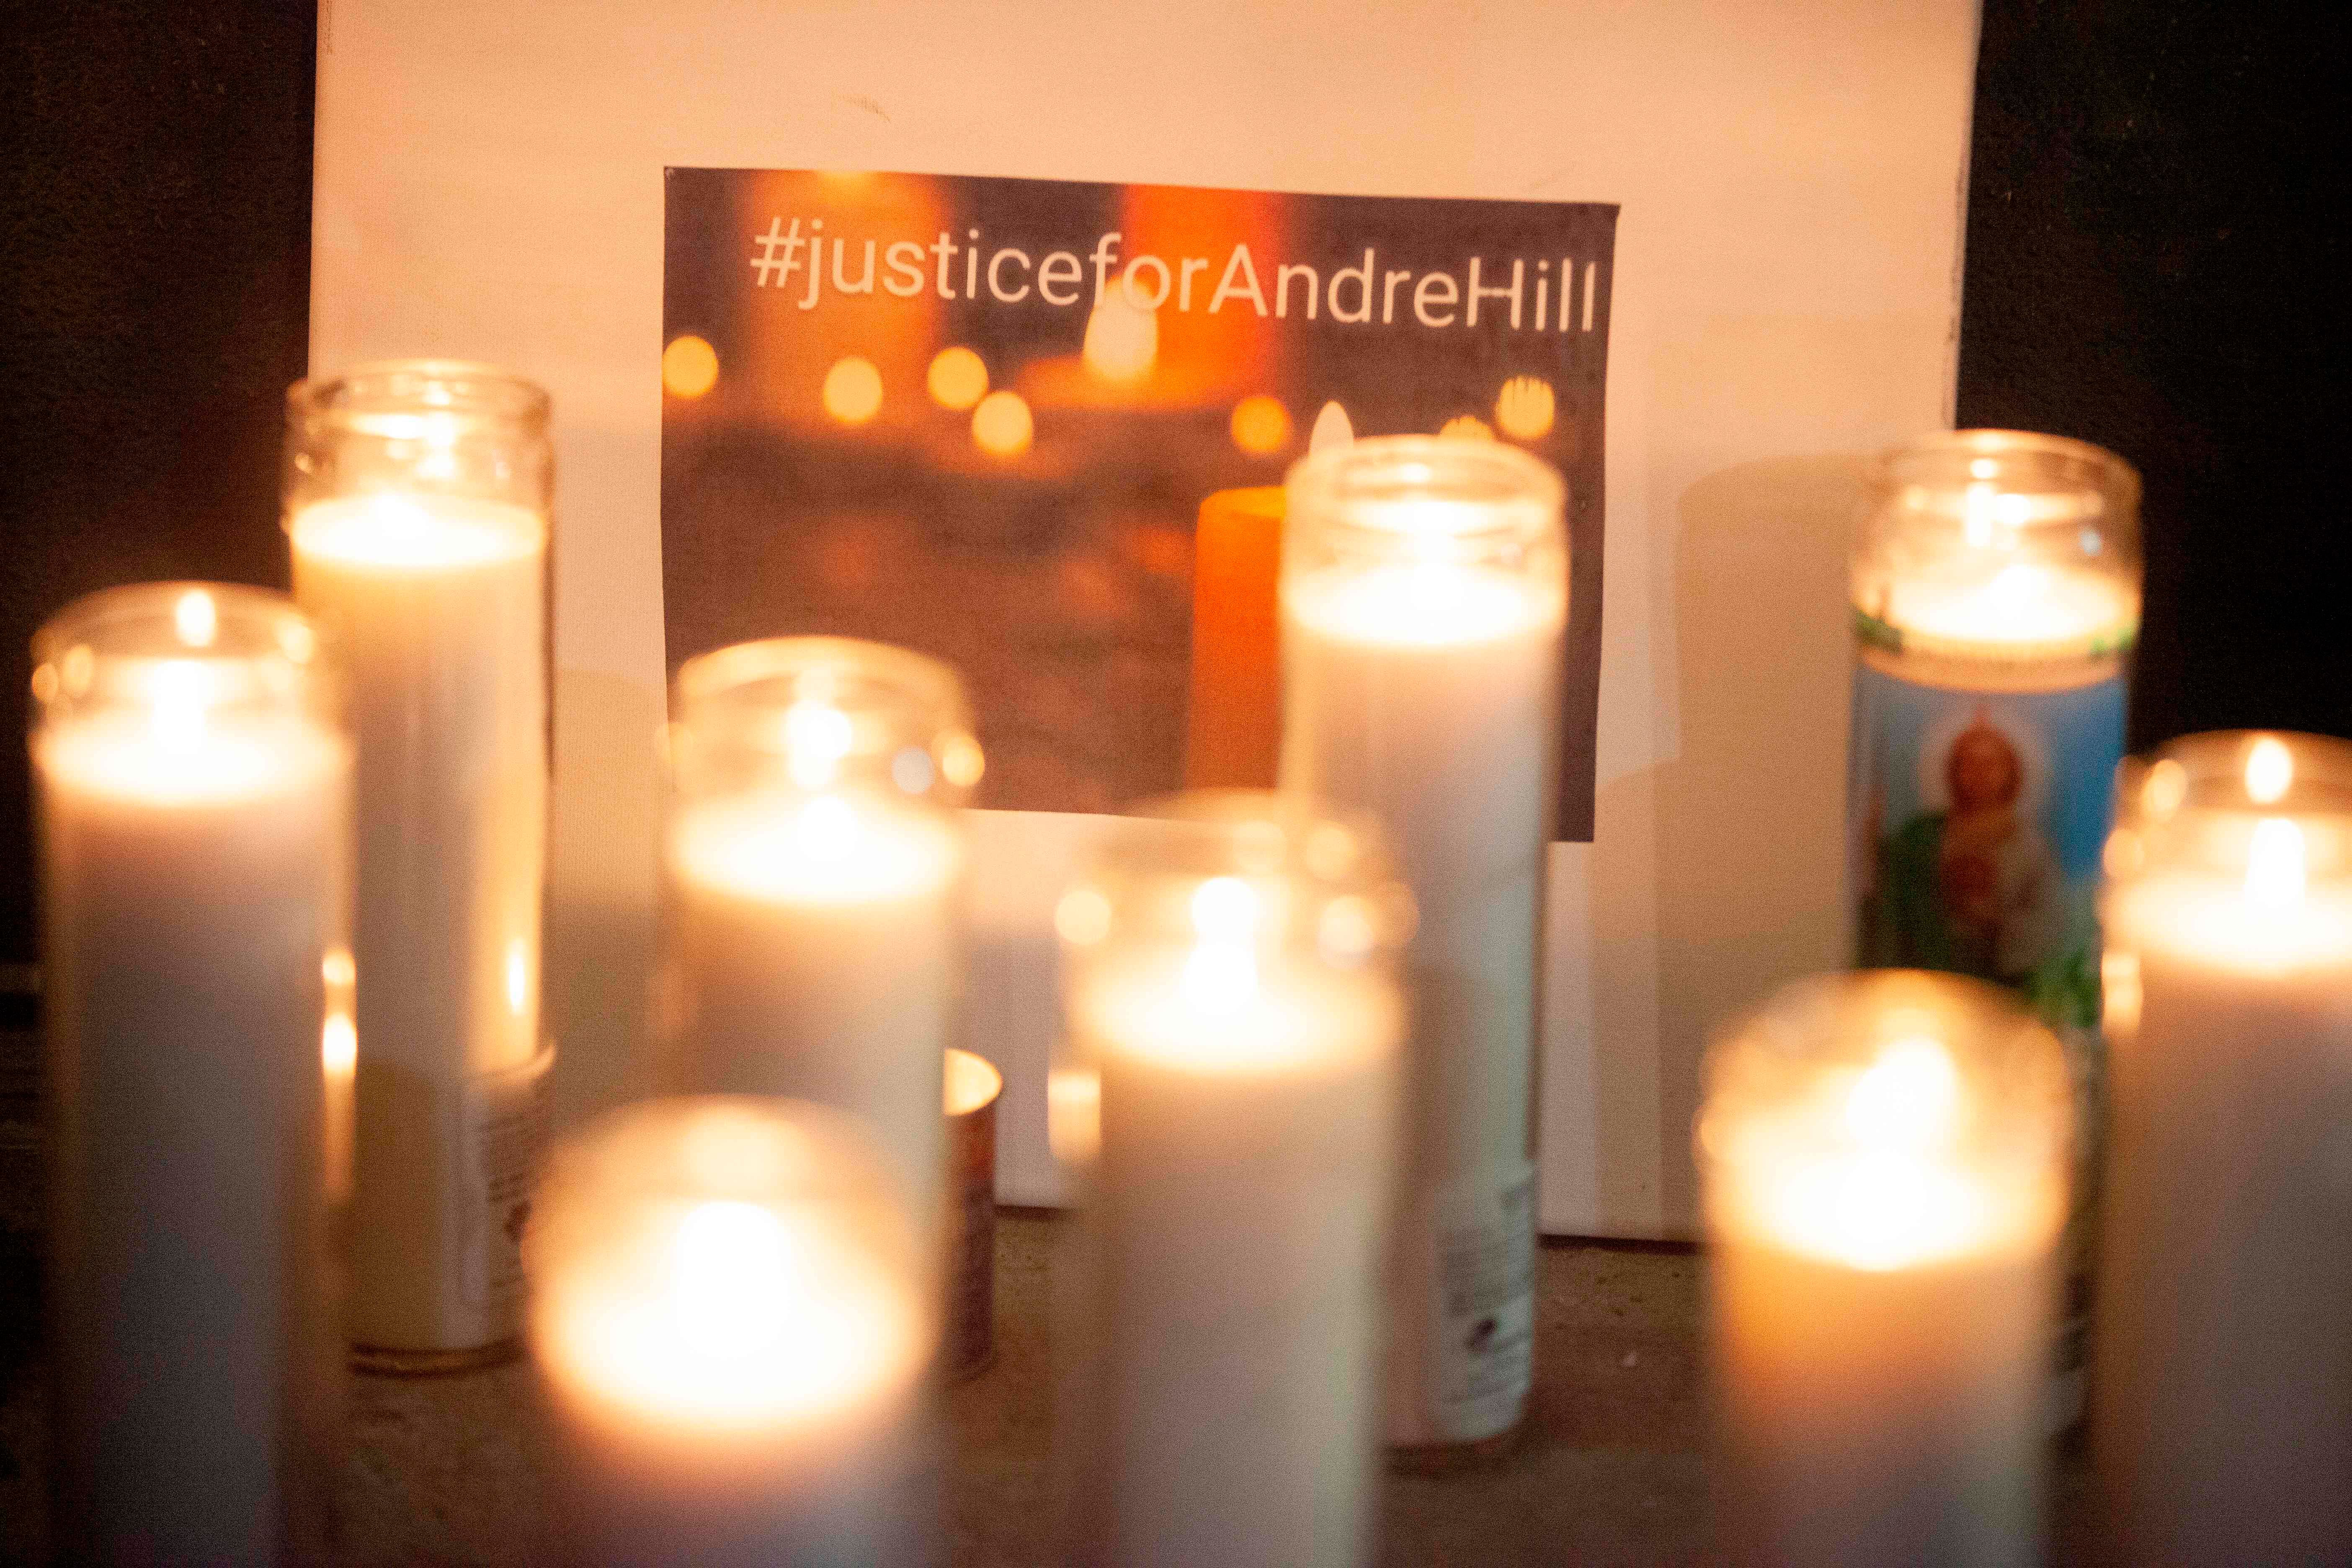 Candles are lit during a vigil to honour Andre Hill's memory outside the Brentnell Community Recreation Center in Columbus, Ohio. Credit: Reuters Photo